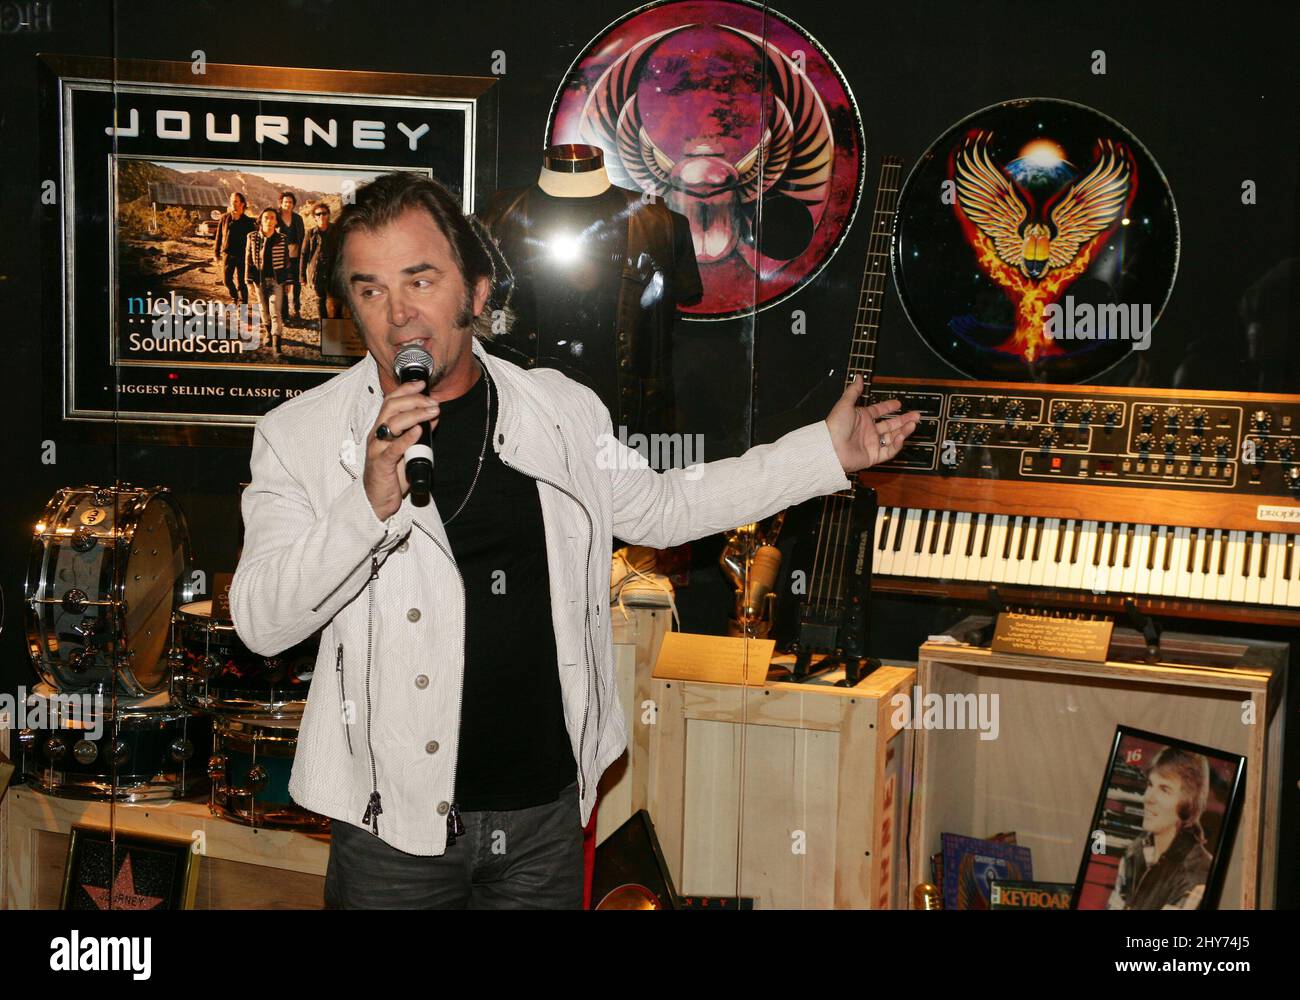 Jonathan Cain as Journey and Neal Schon unveil memorabilia cases At Hard Rock Hotel & Casino, Las Vegas. Stock Photo